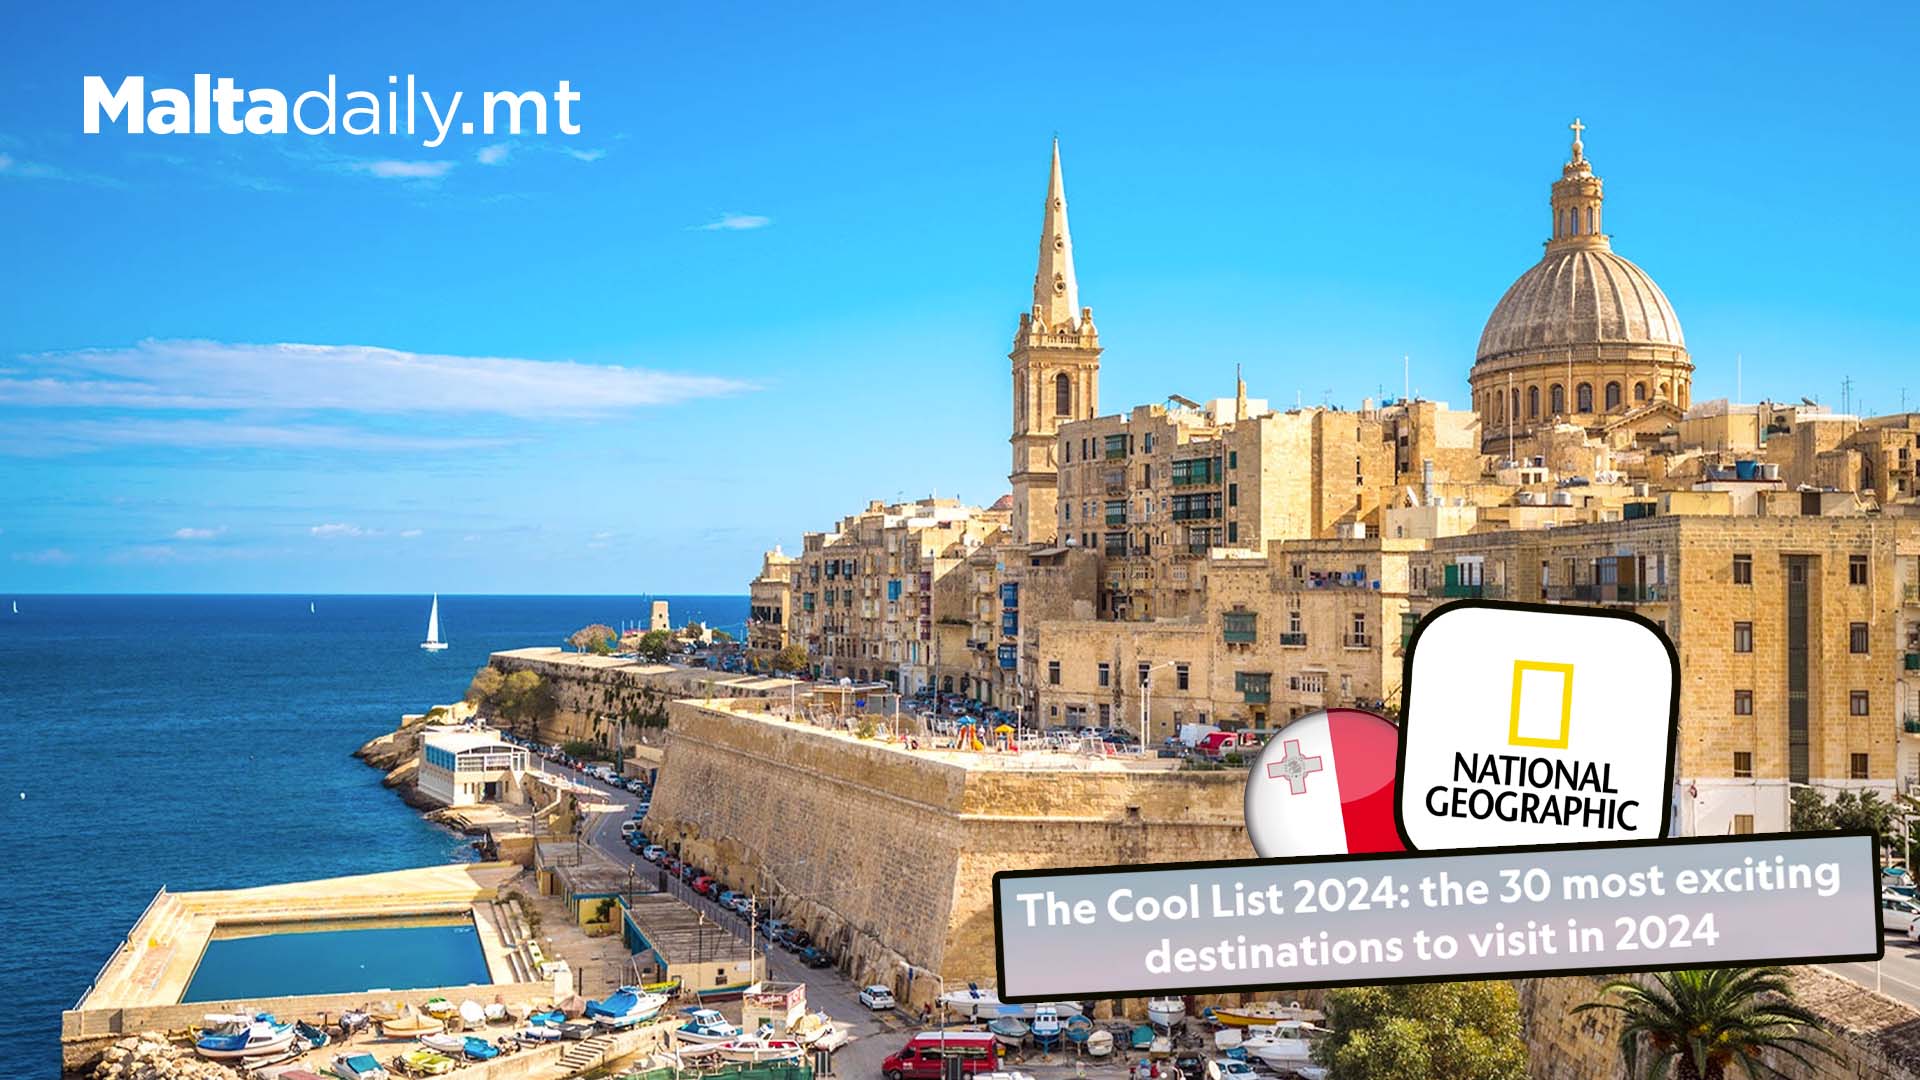 Valletta Makes National Geographic's List Of 'Cool' Destinations